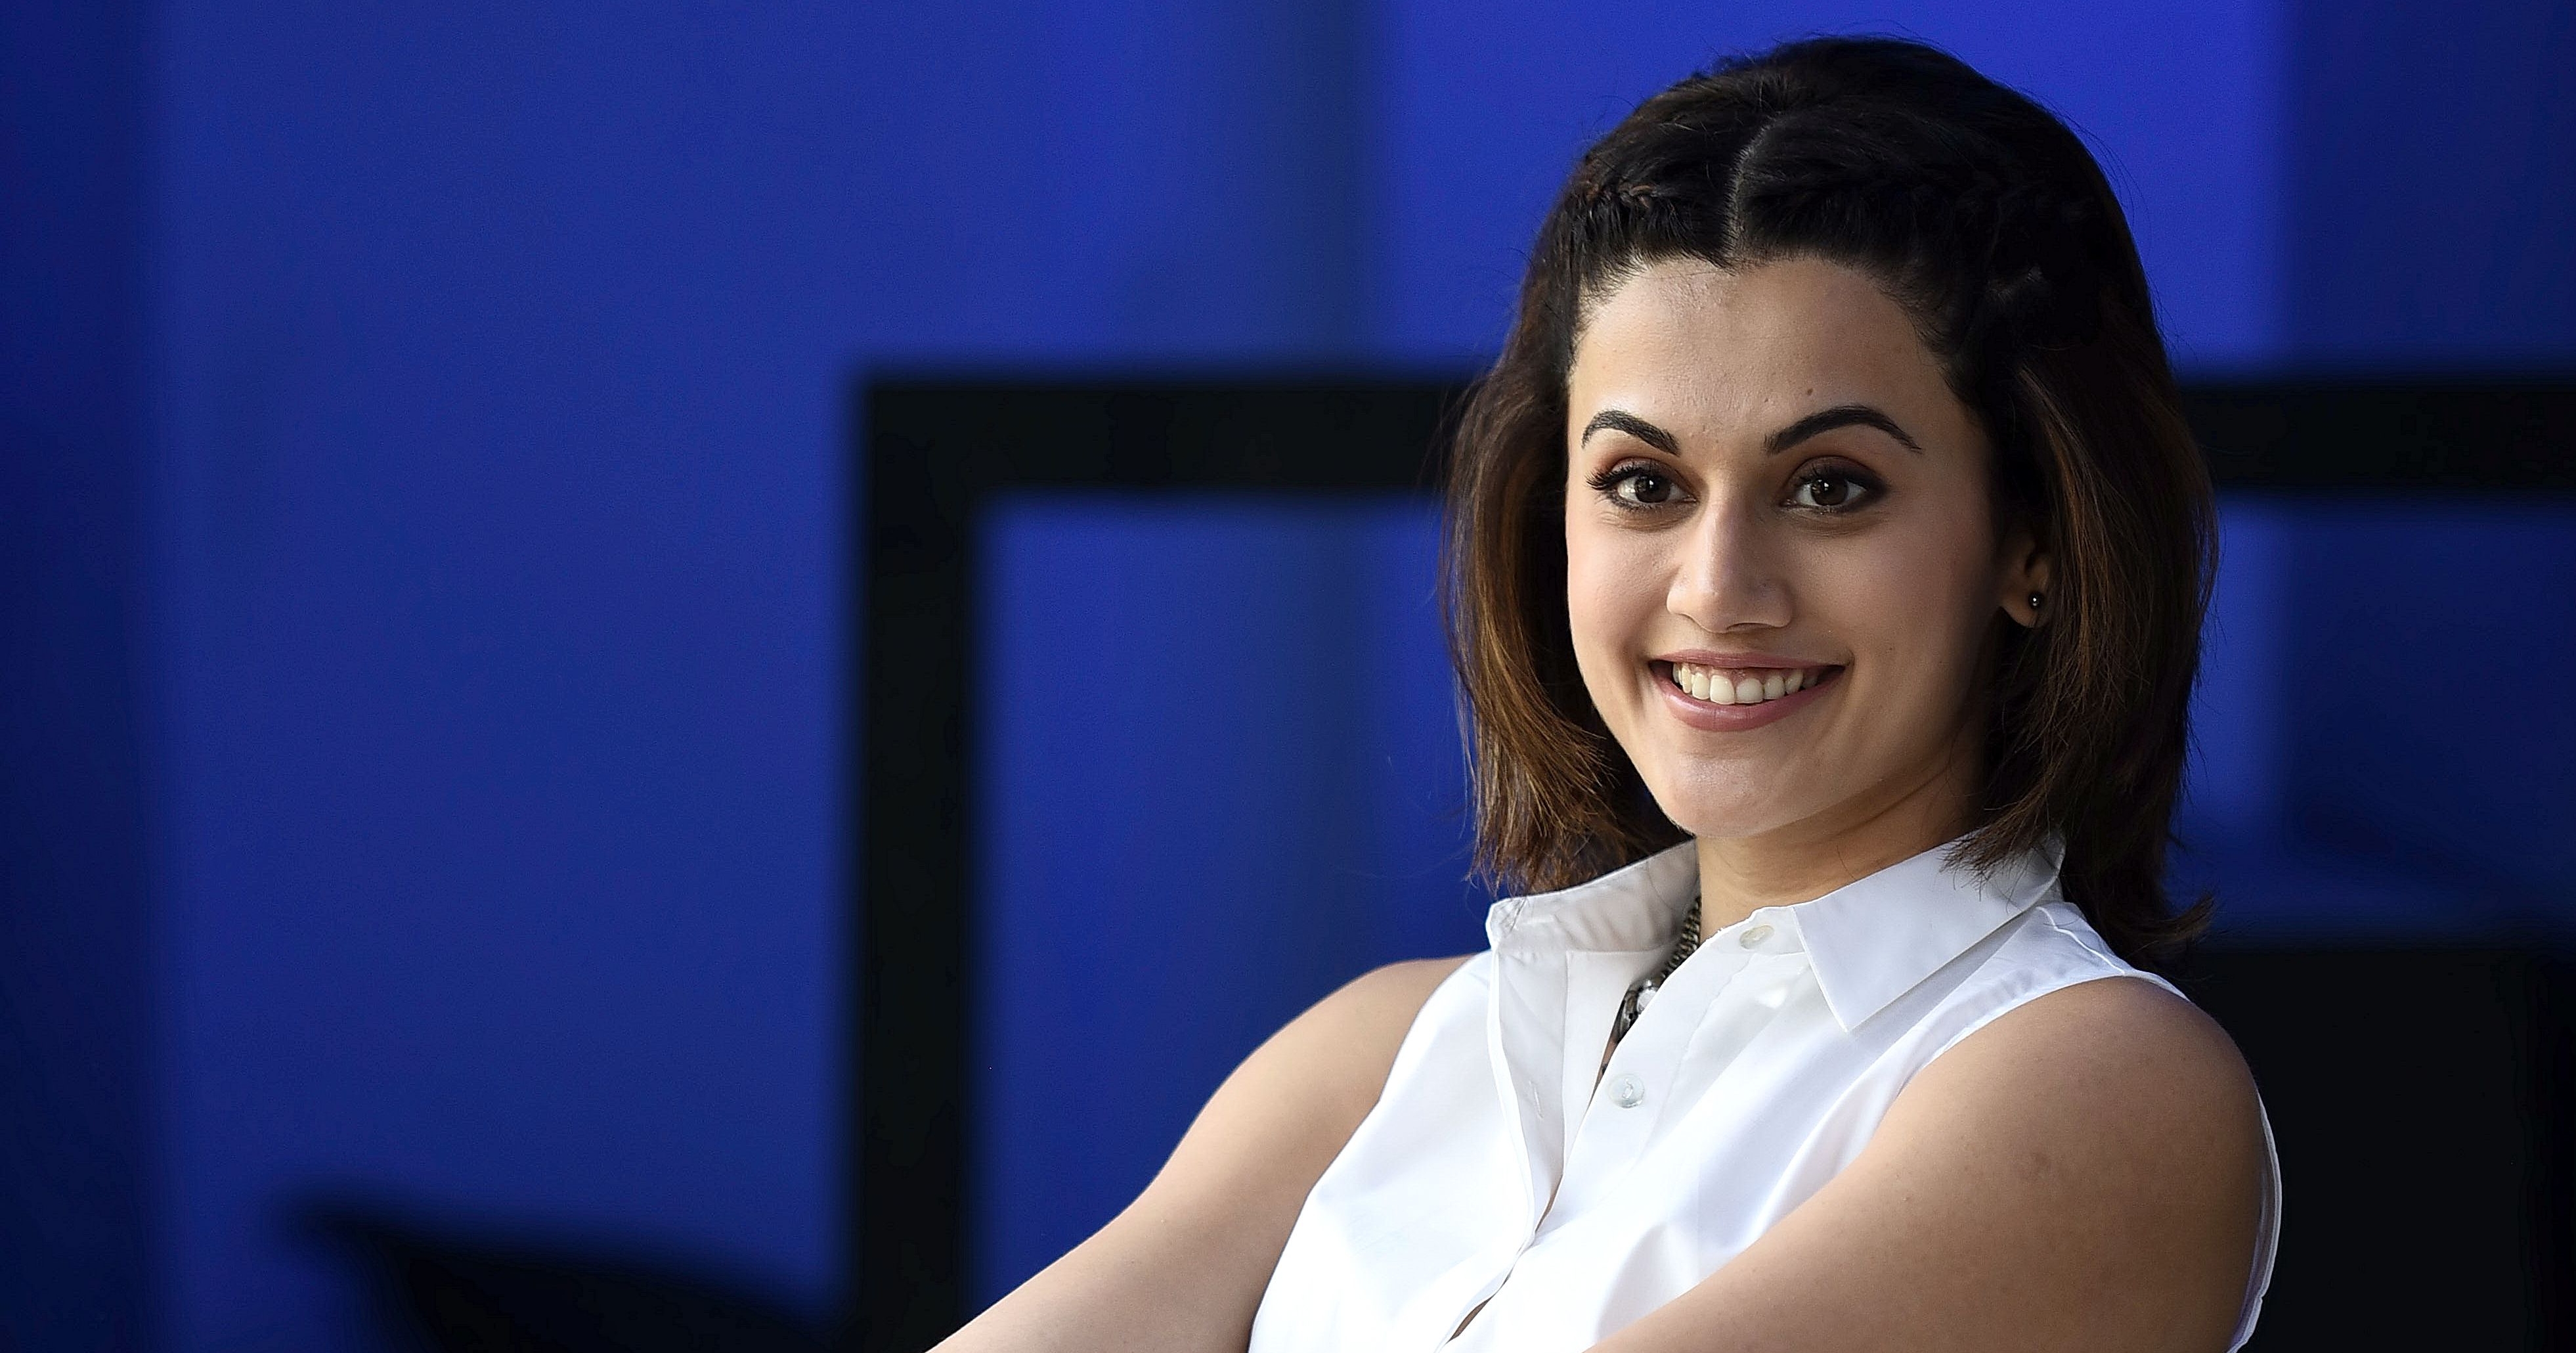 Taapsee Pannu Reveals Why Women Need To Be Their Own Heroes At All Times